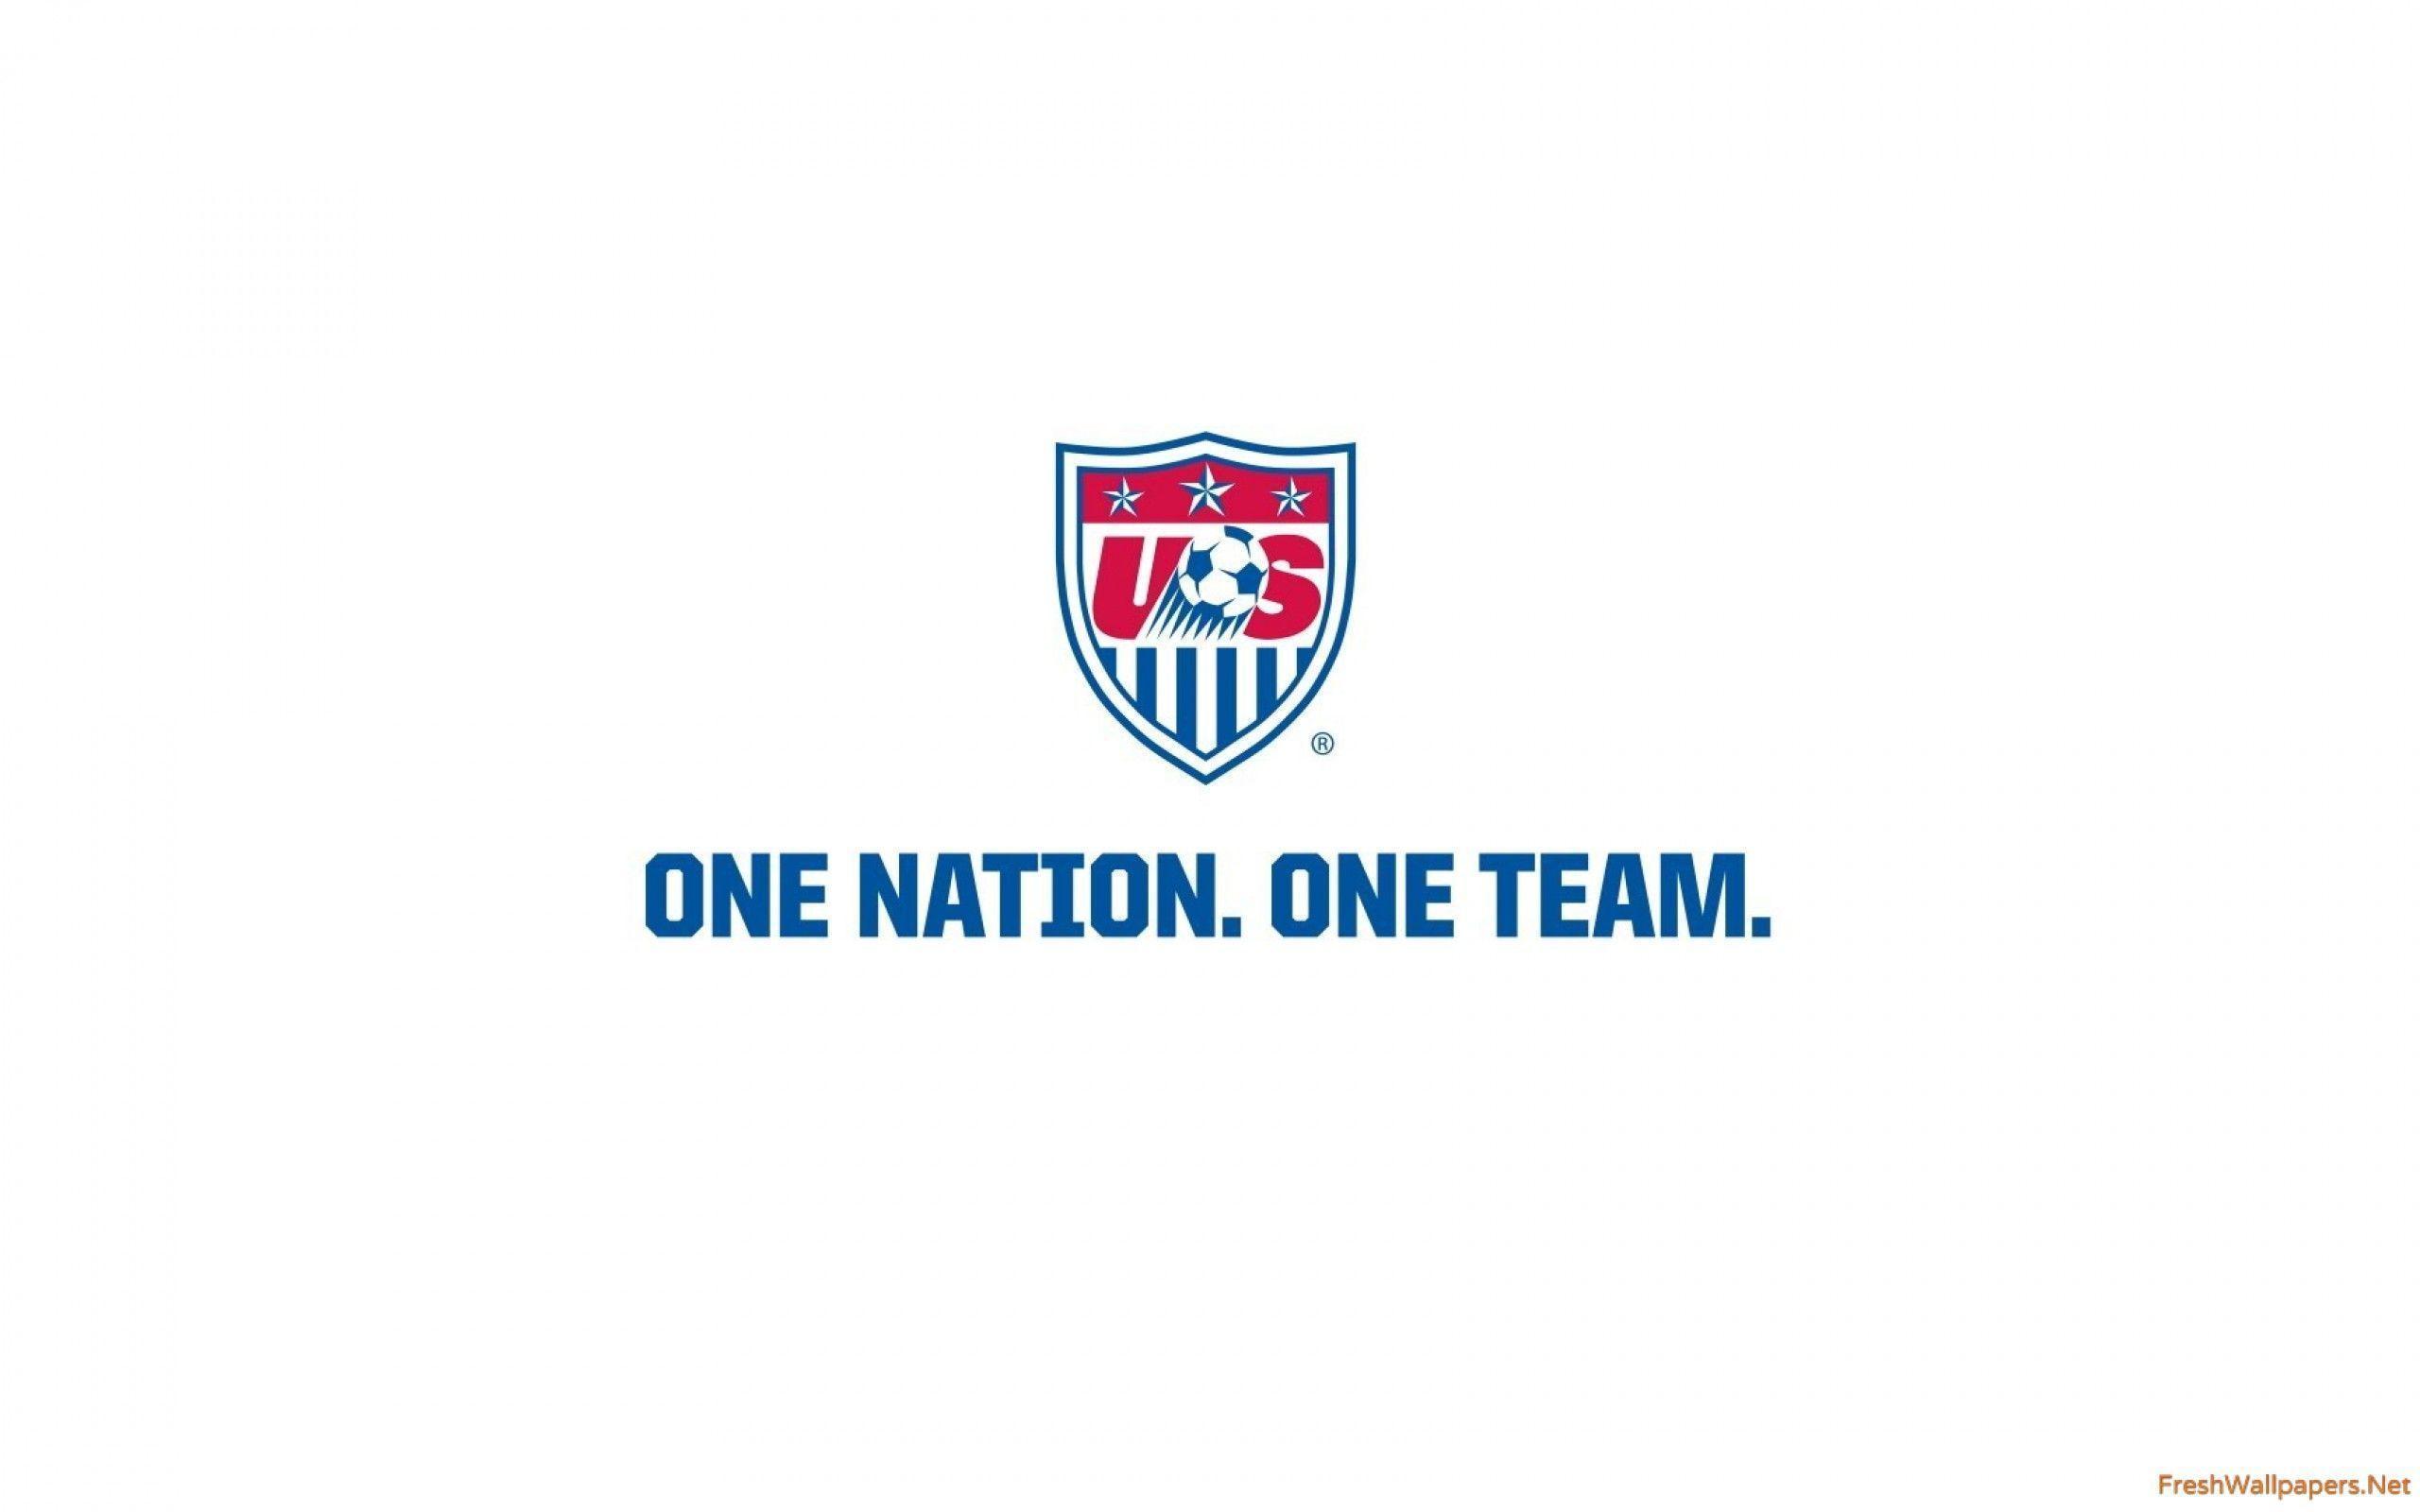 Usmnt one nation one team wallpapers